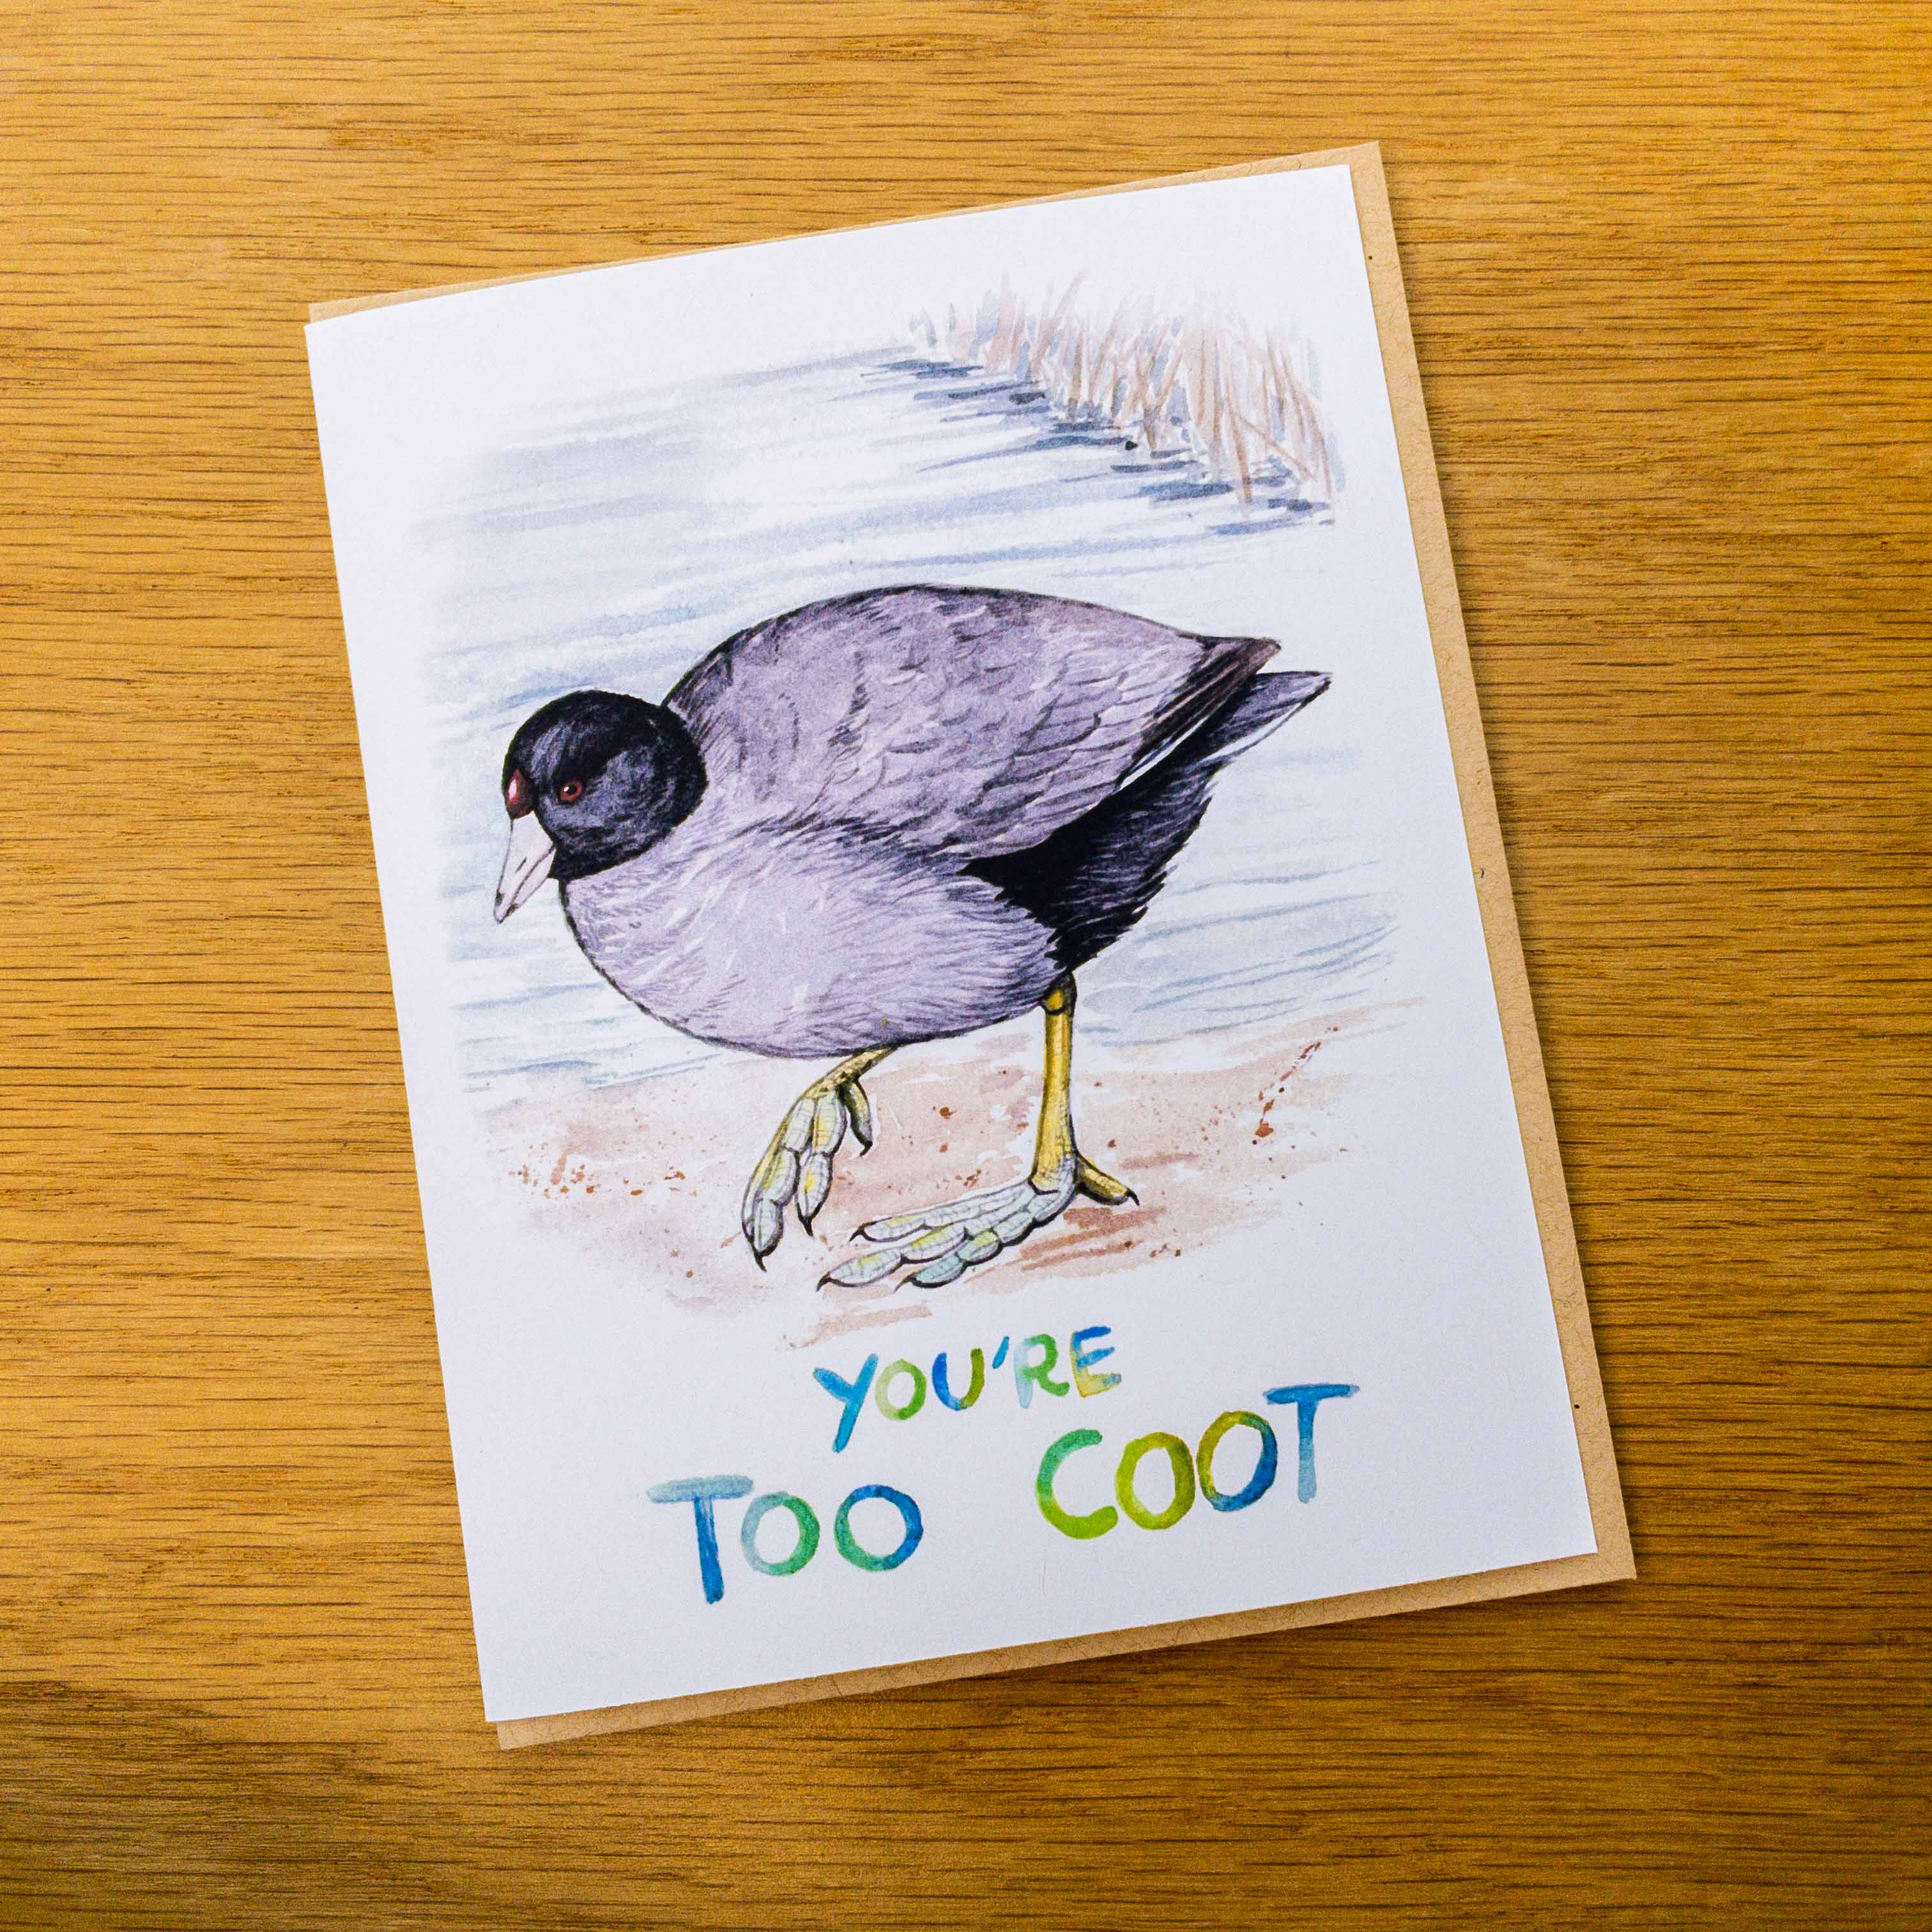 Too Coot American Coot Greeting Card 100% Recycled Paper